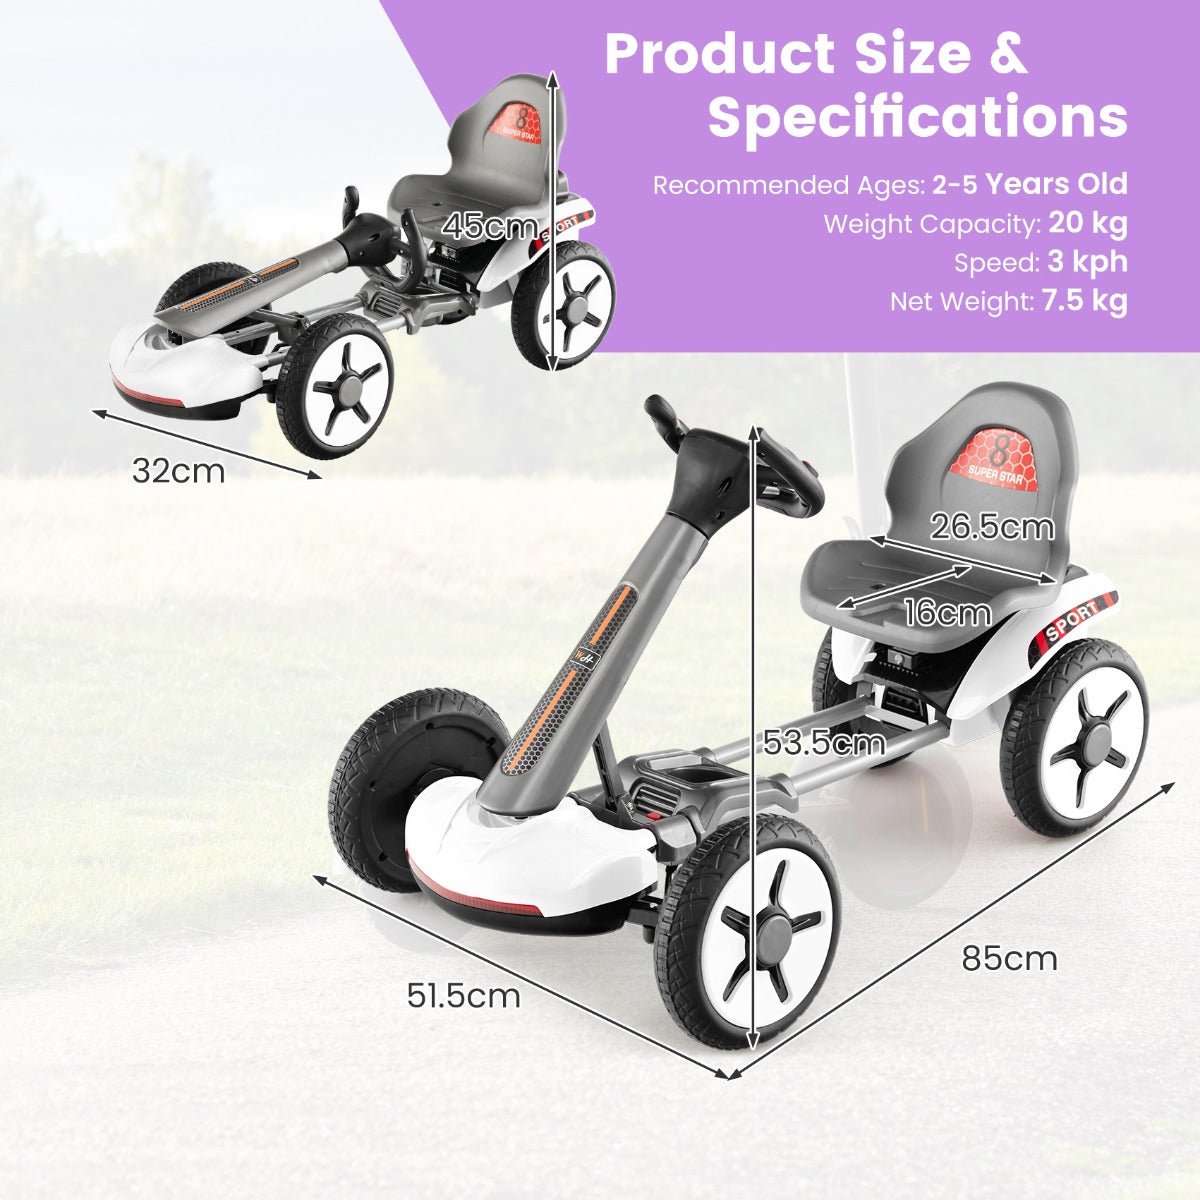 Measurements Foldable Go Kart for Easy Storage and Transport